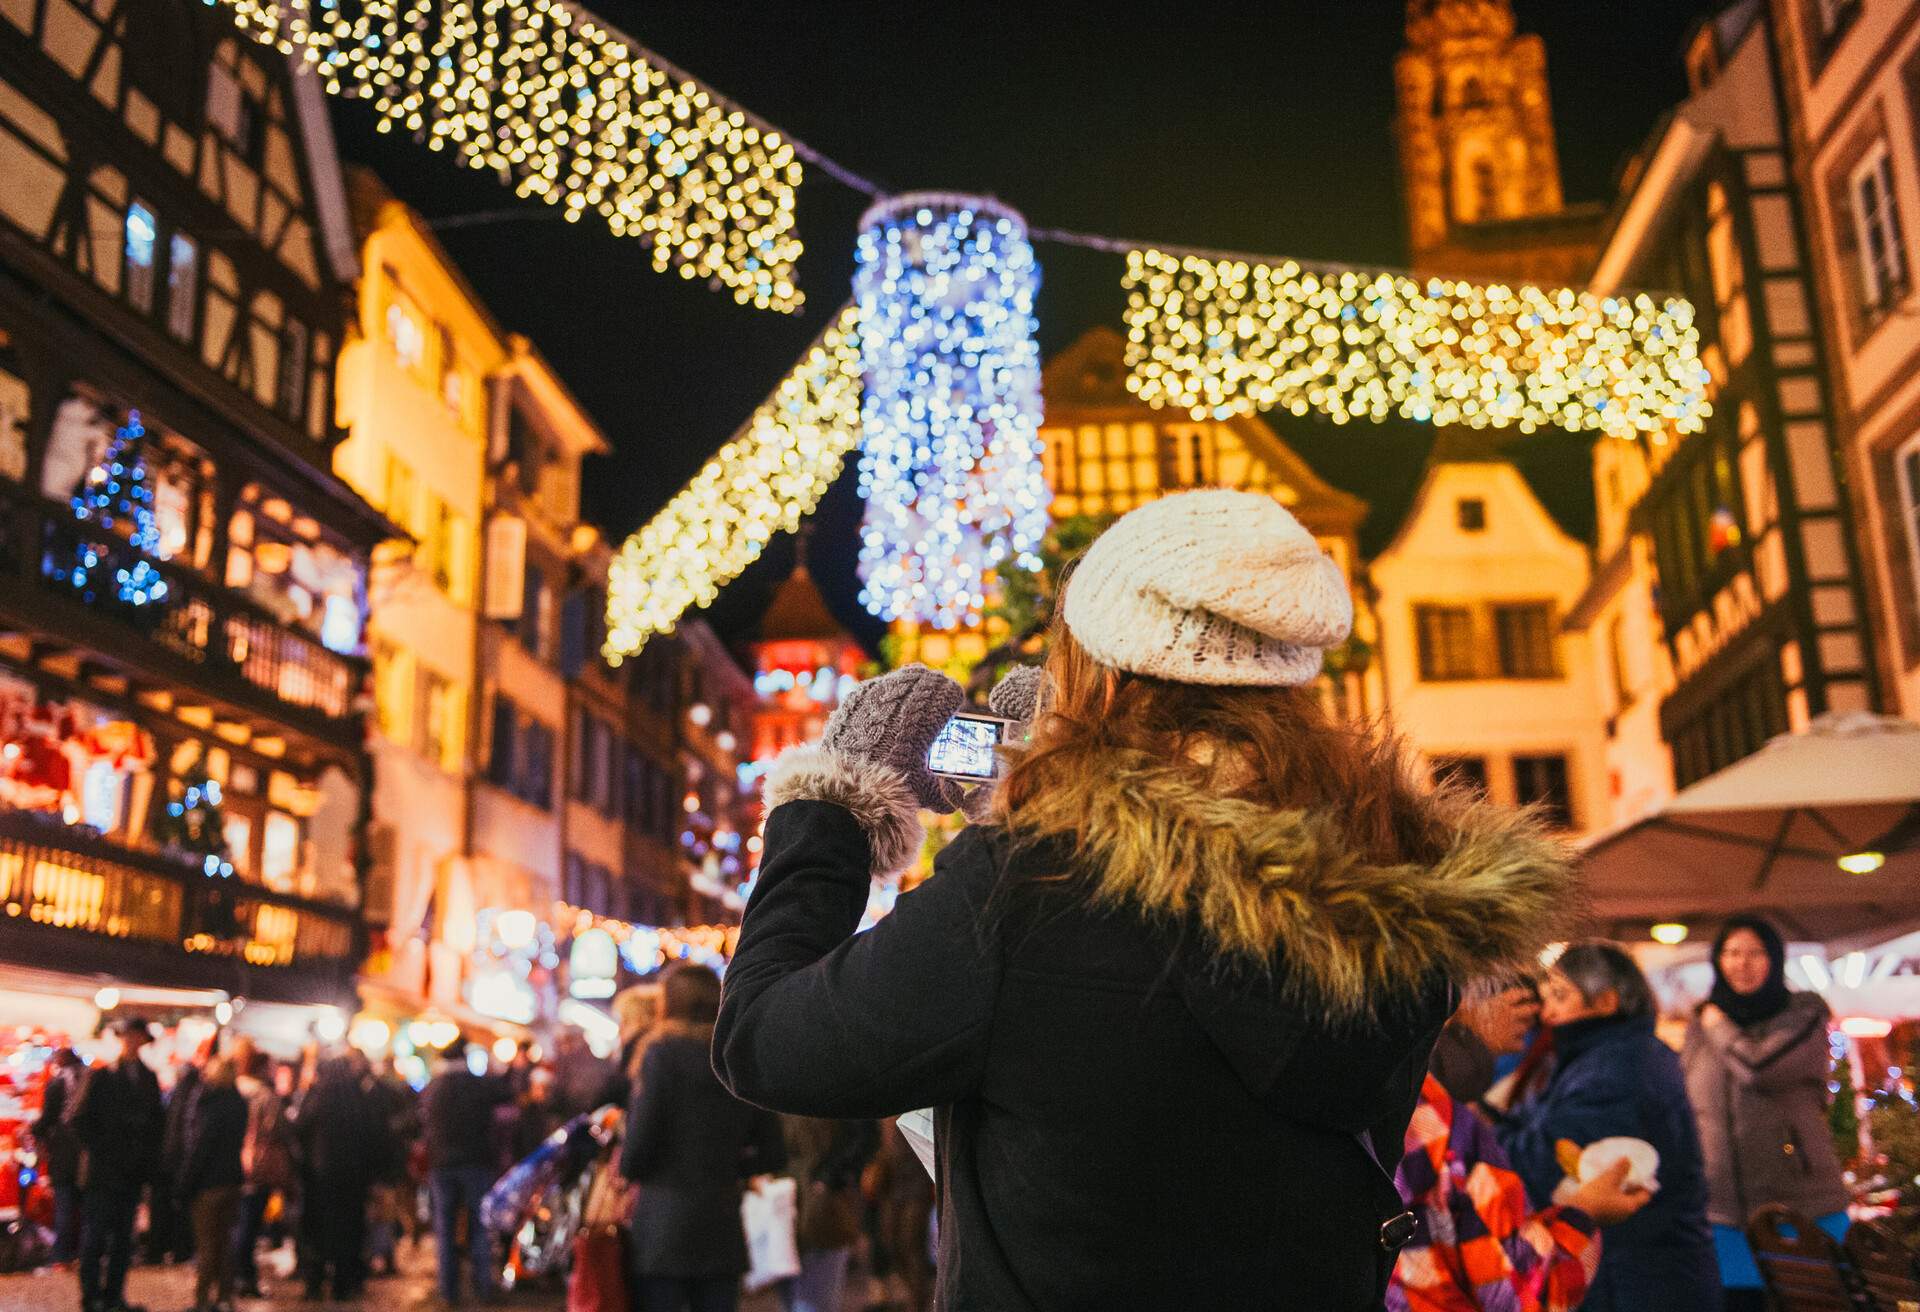 A woman using her camera to capture the scene at a market square with lights.